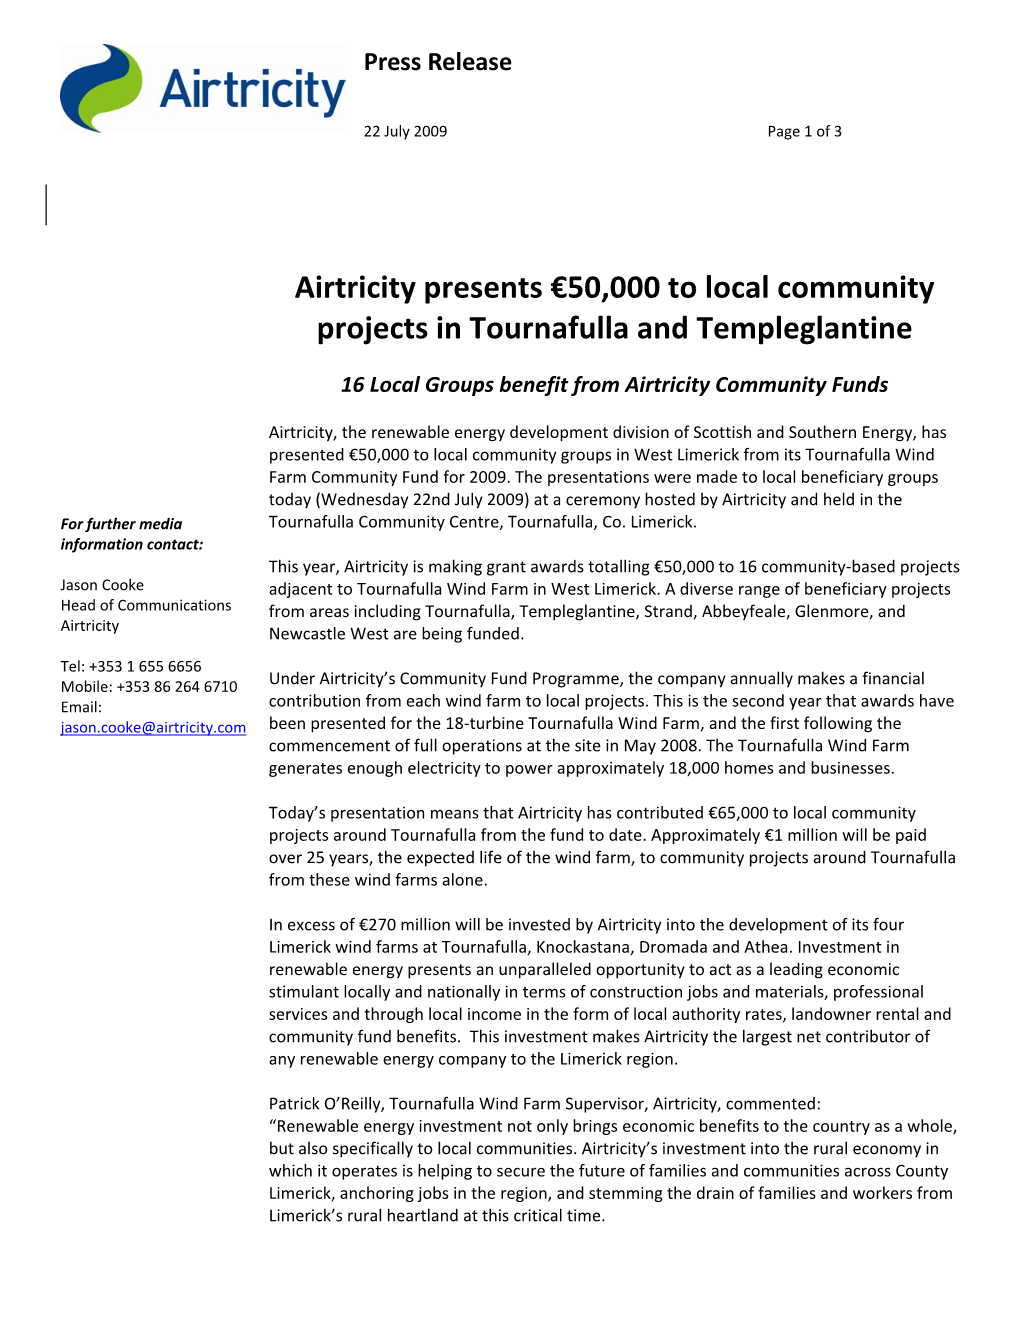 Airtricity Presents €50,000 to Local Community Projects in Tournafulla and Templeglantine